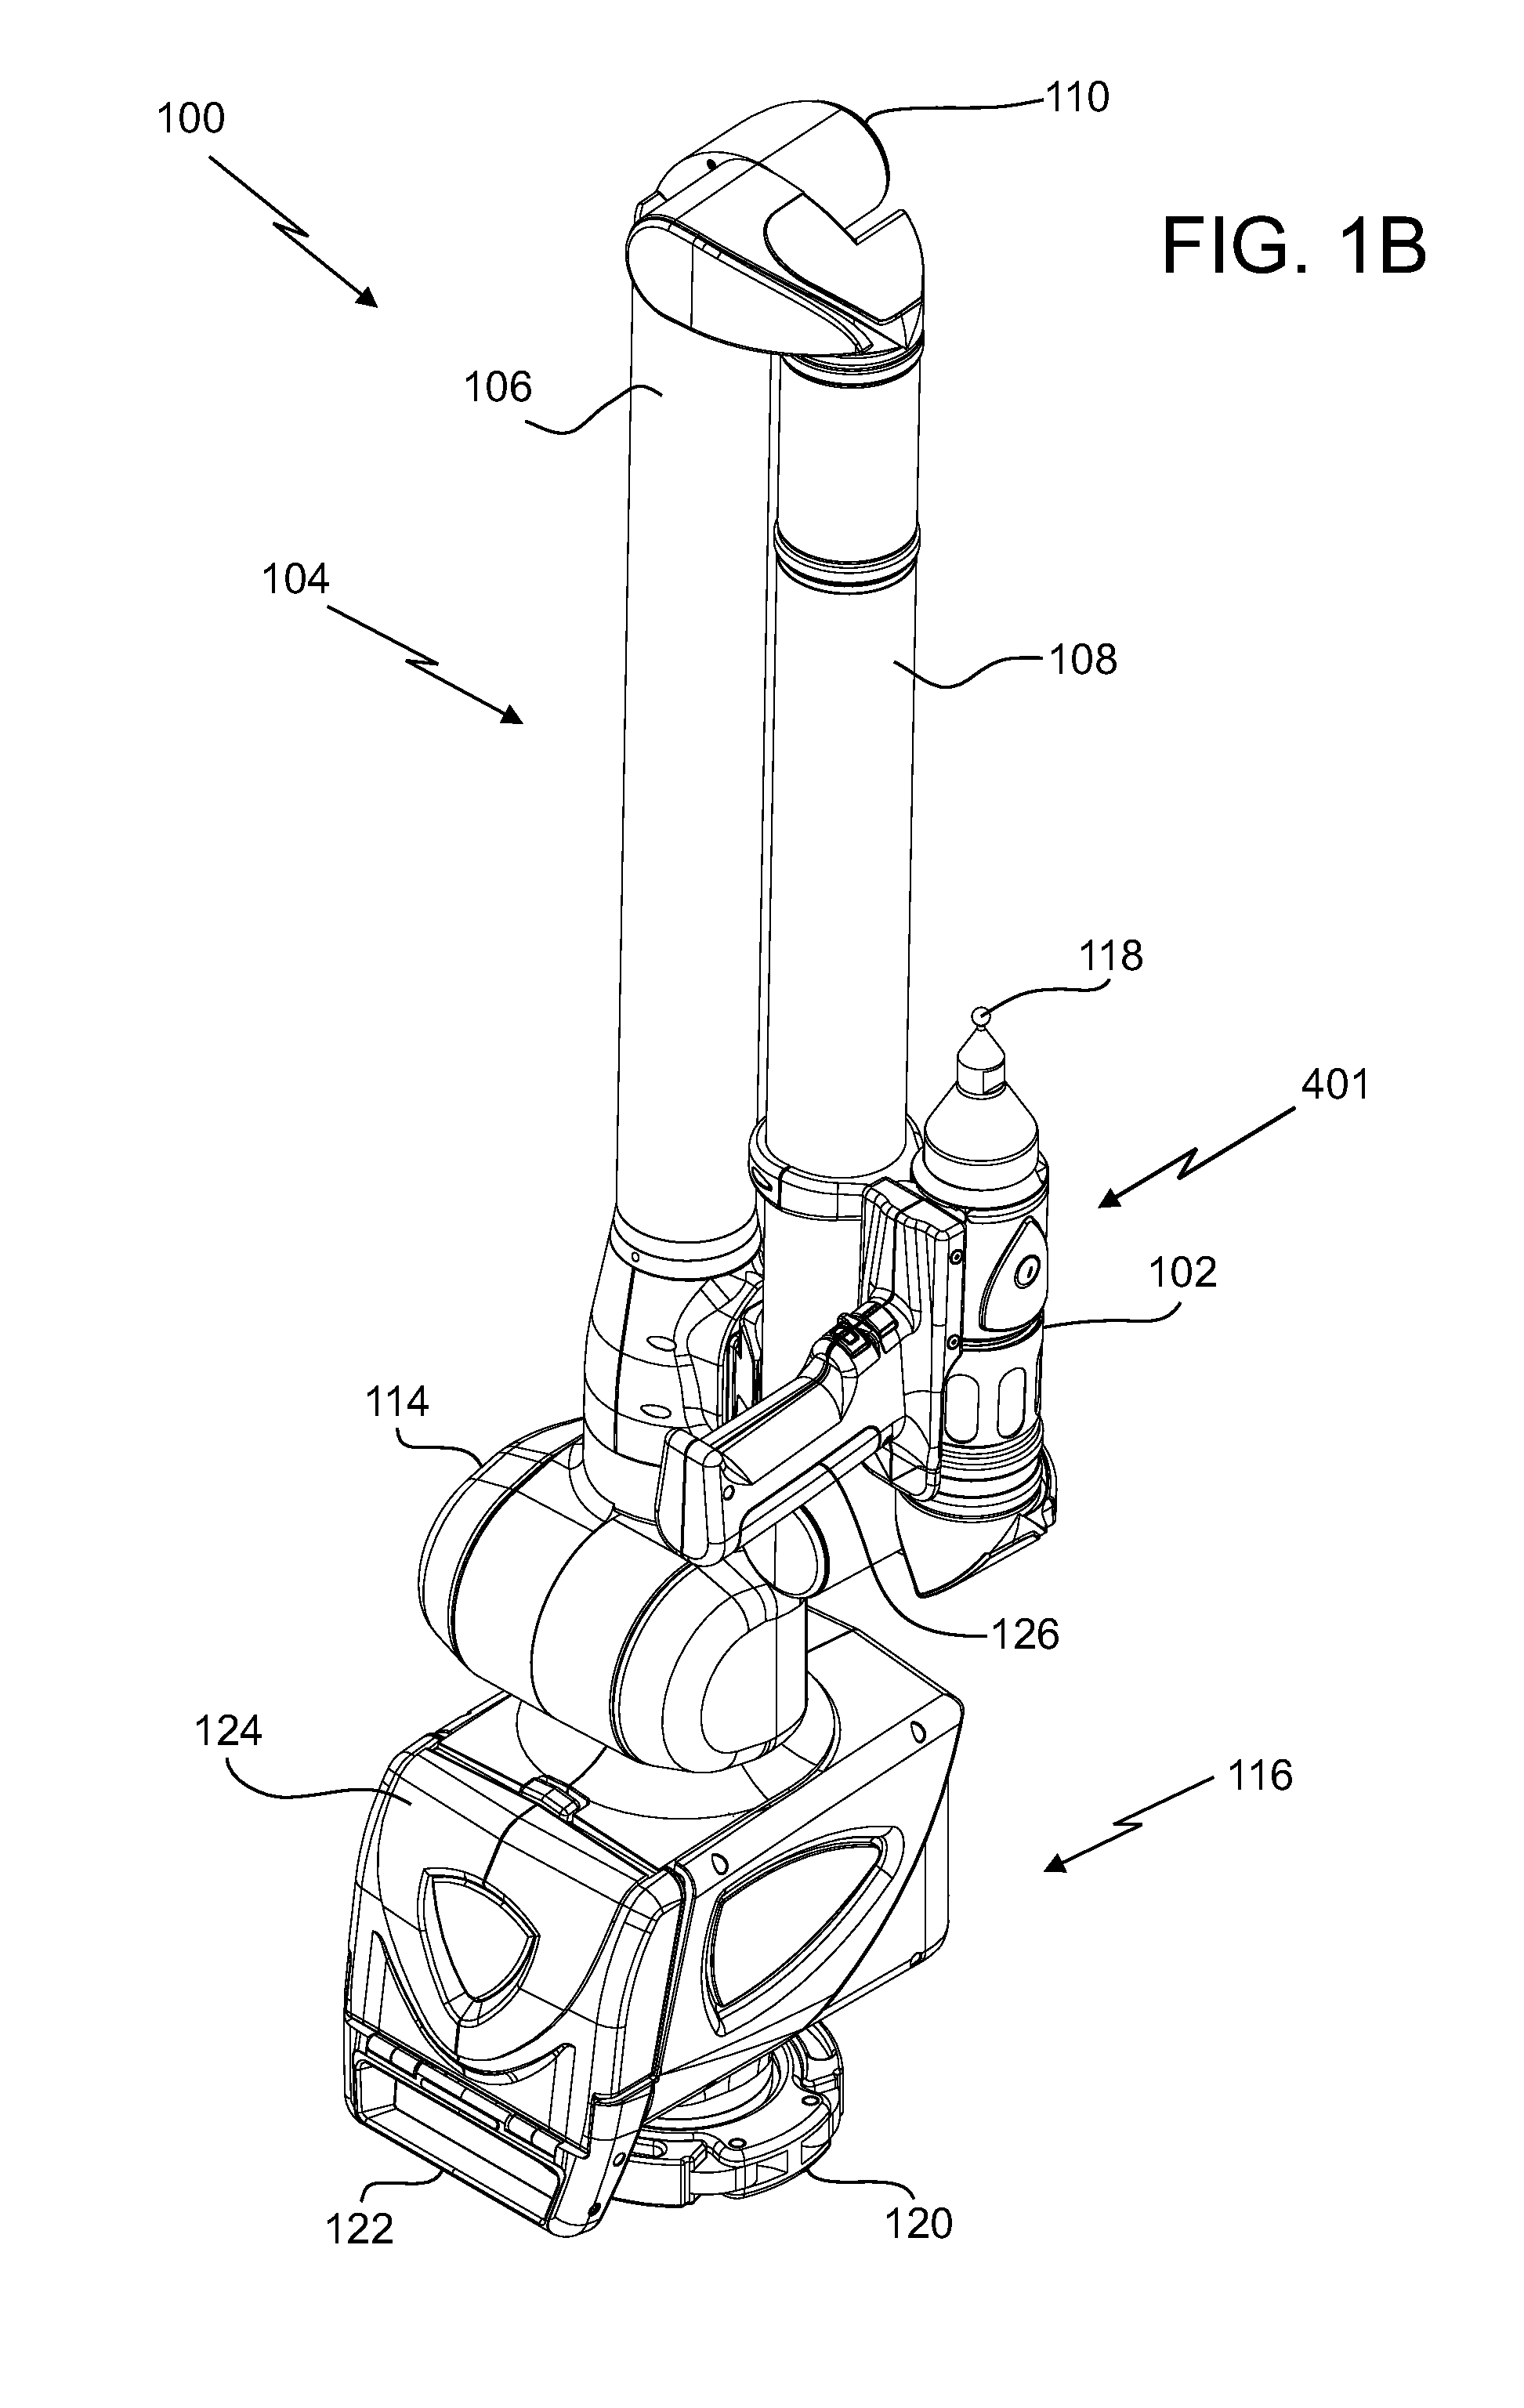 Laser line probe that produces a line of light having a substantially even intensity distribution